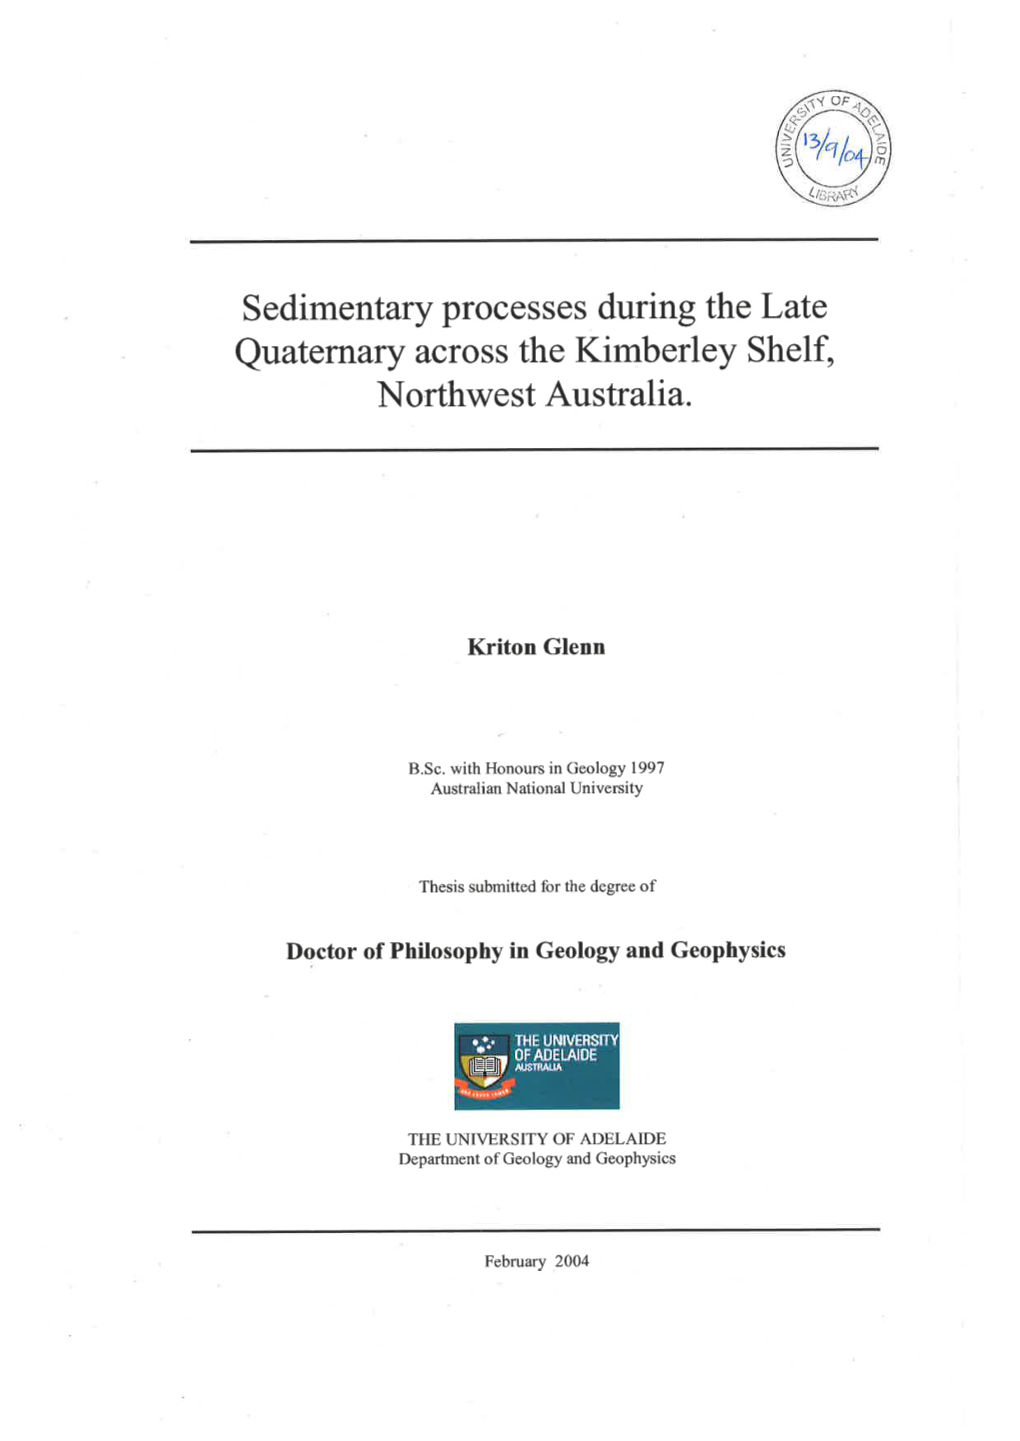 Sedimentary Processes During the Late Quaternary Across The